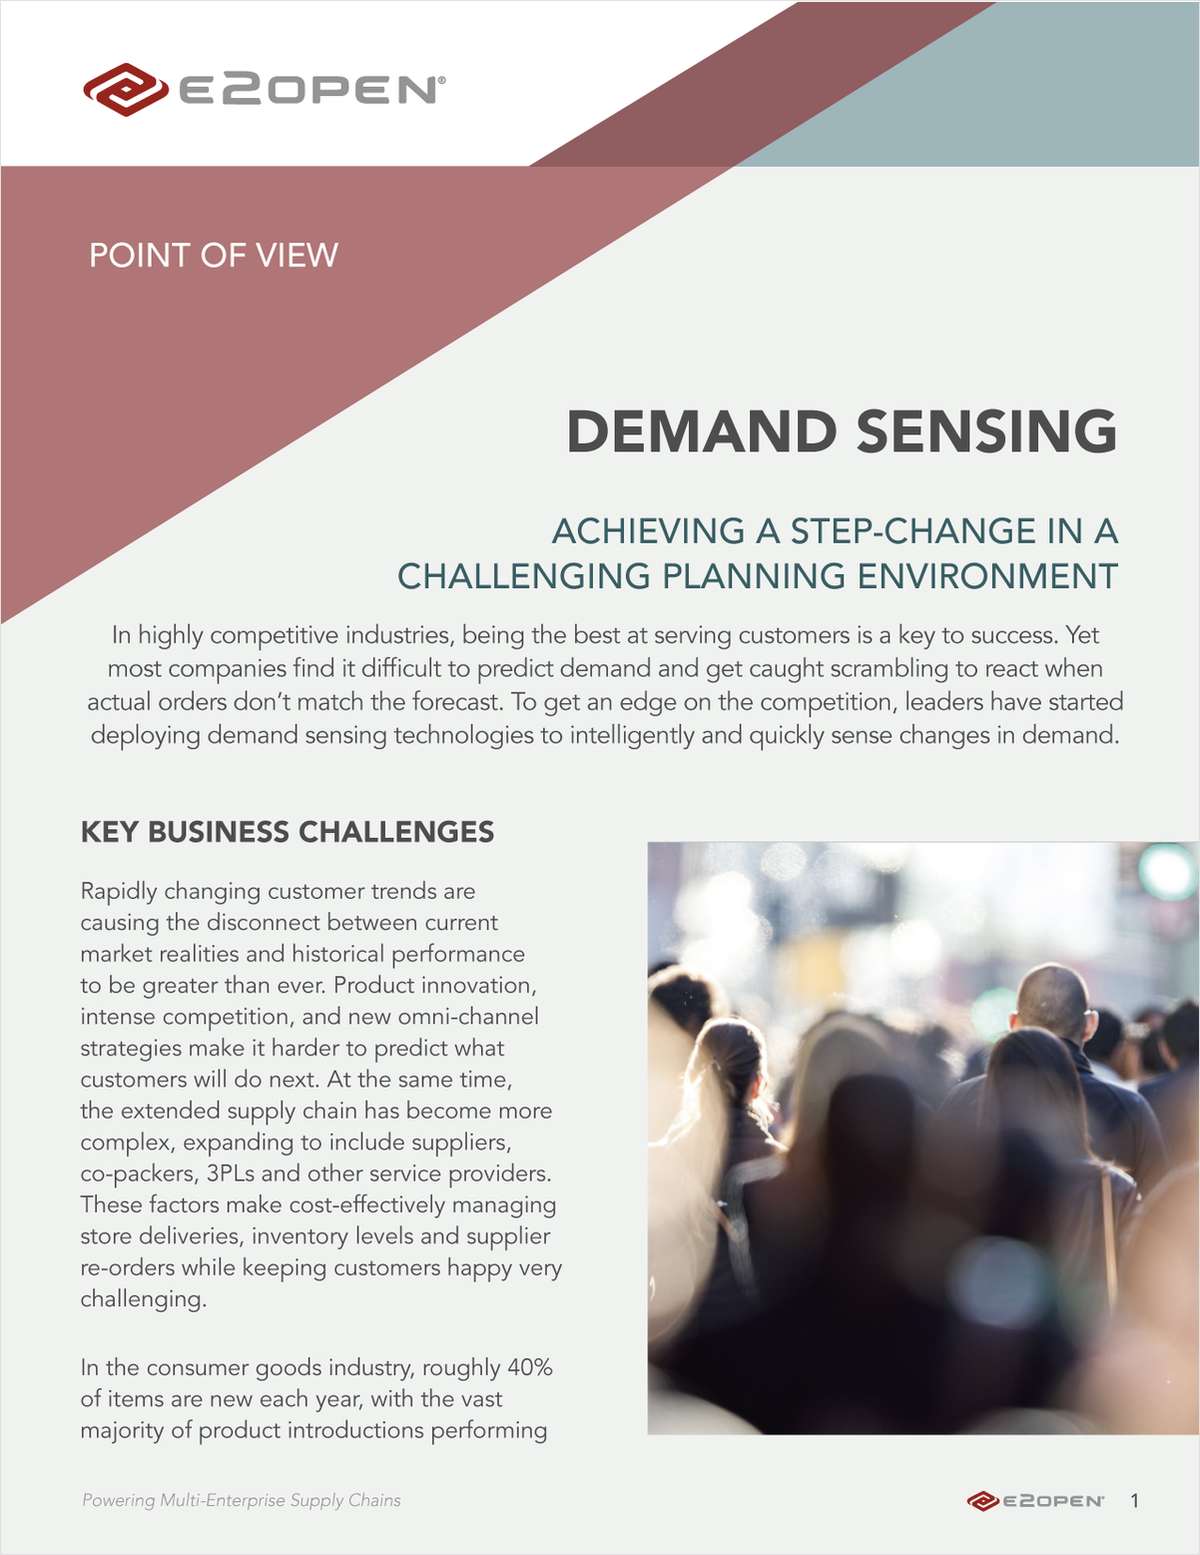 Demand Sensing: Achieving a step-change in a challenging planning environment